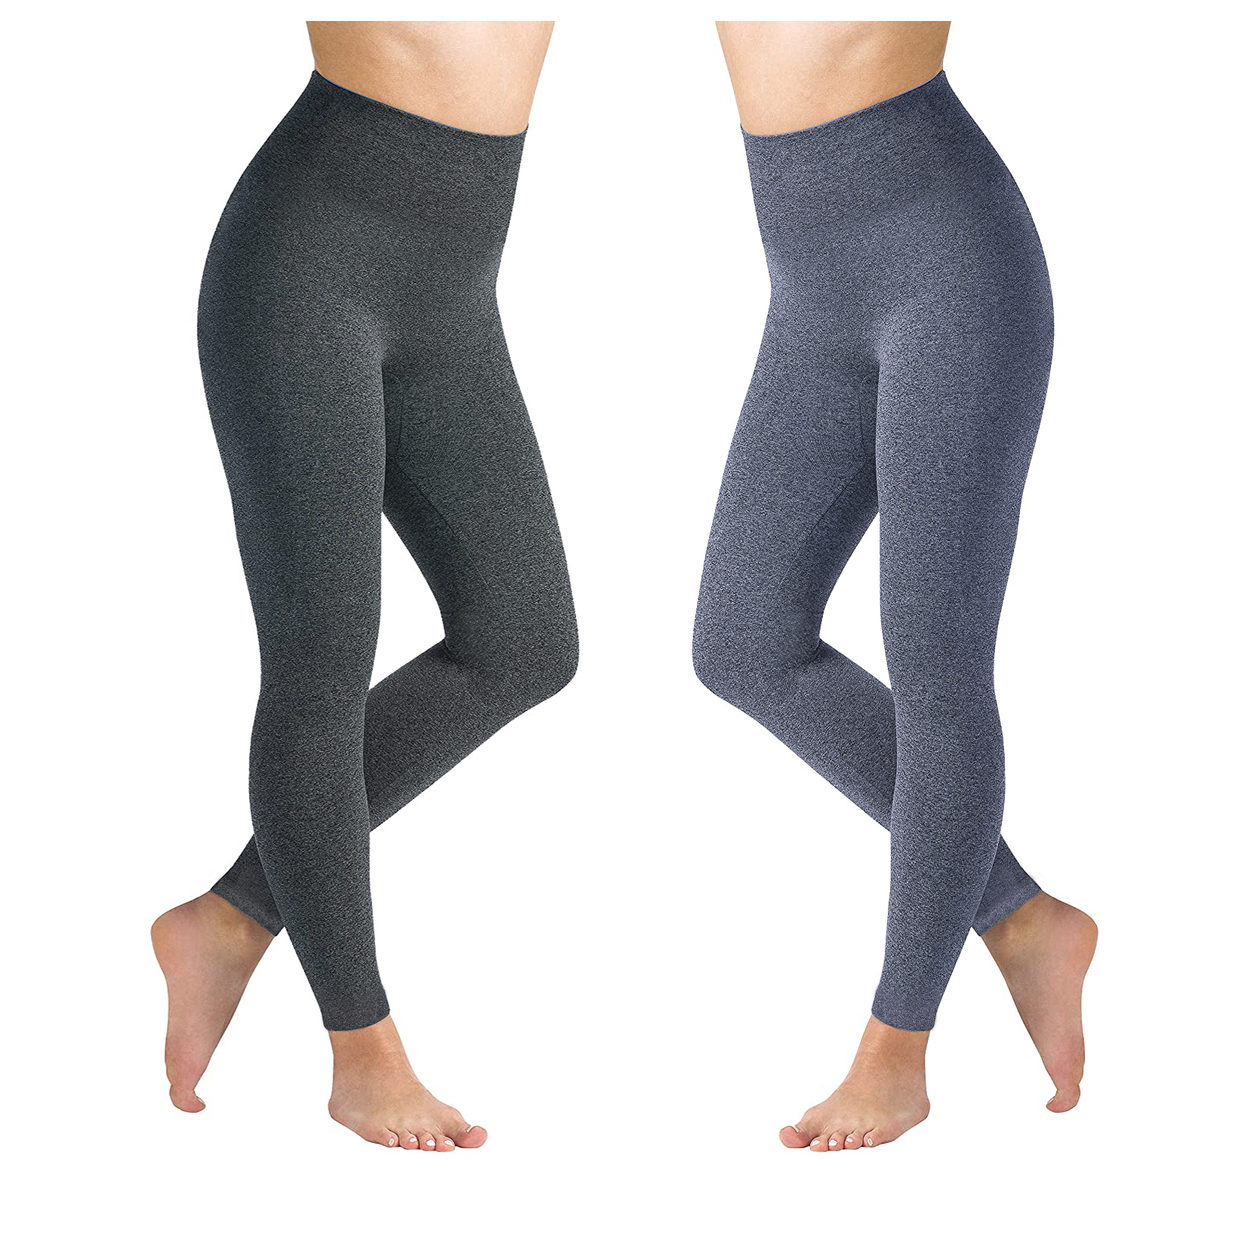 2-Pack: Women's High Waisted Ultra Soft Fleece Lined Warm Marled Leggings(Available In Plus Sizes) - Charcoal & Charcoal, Large